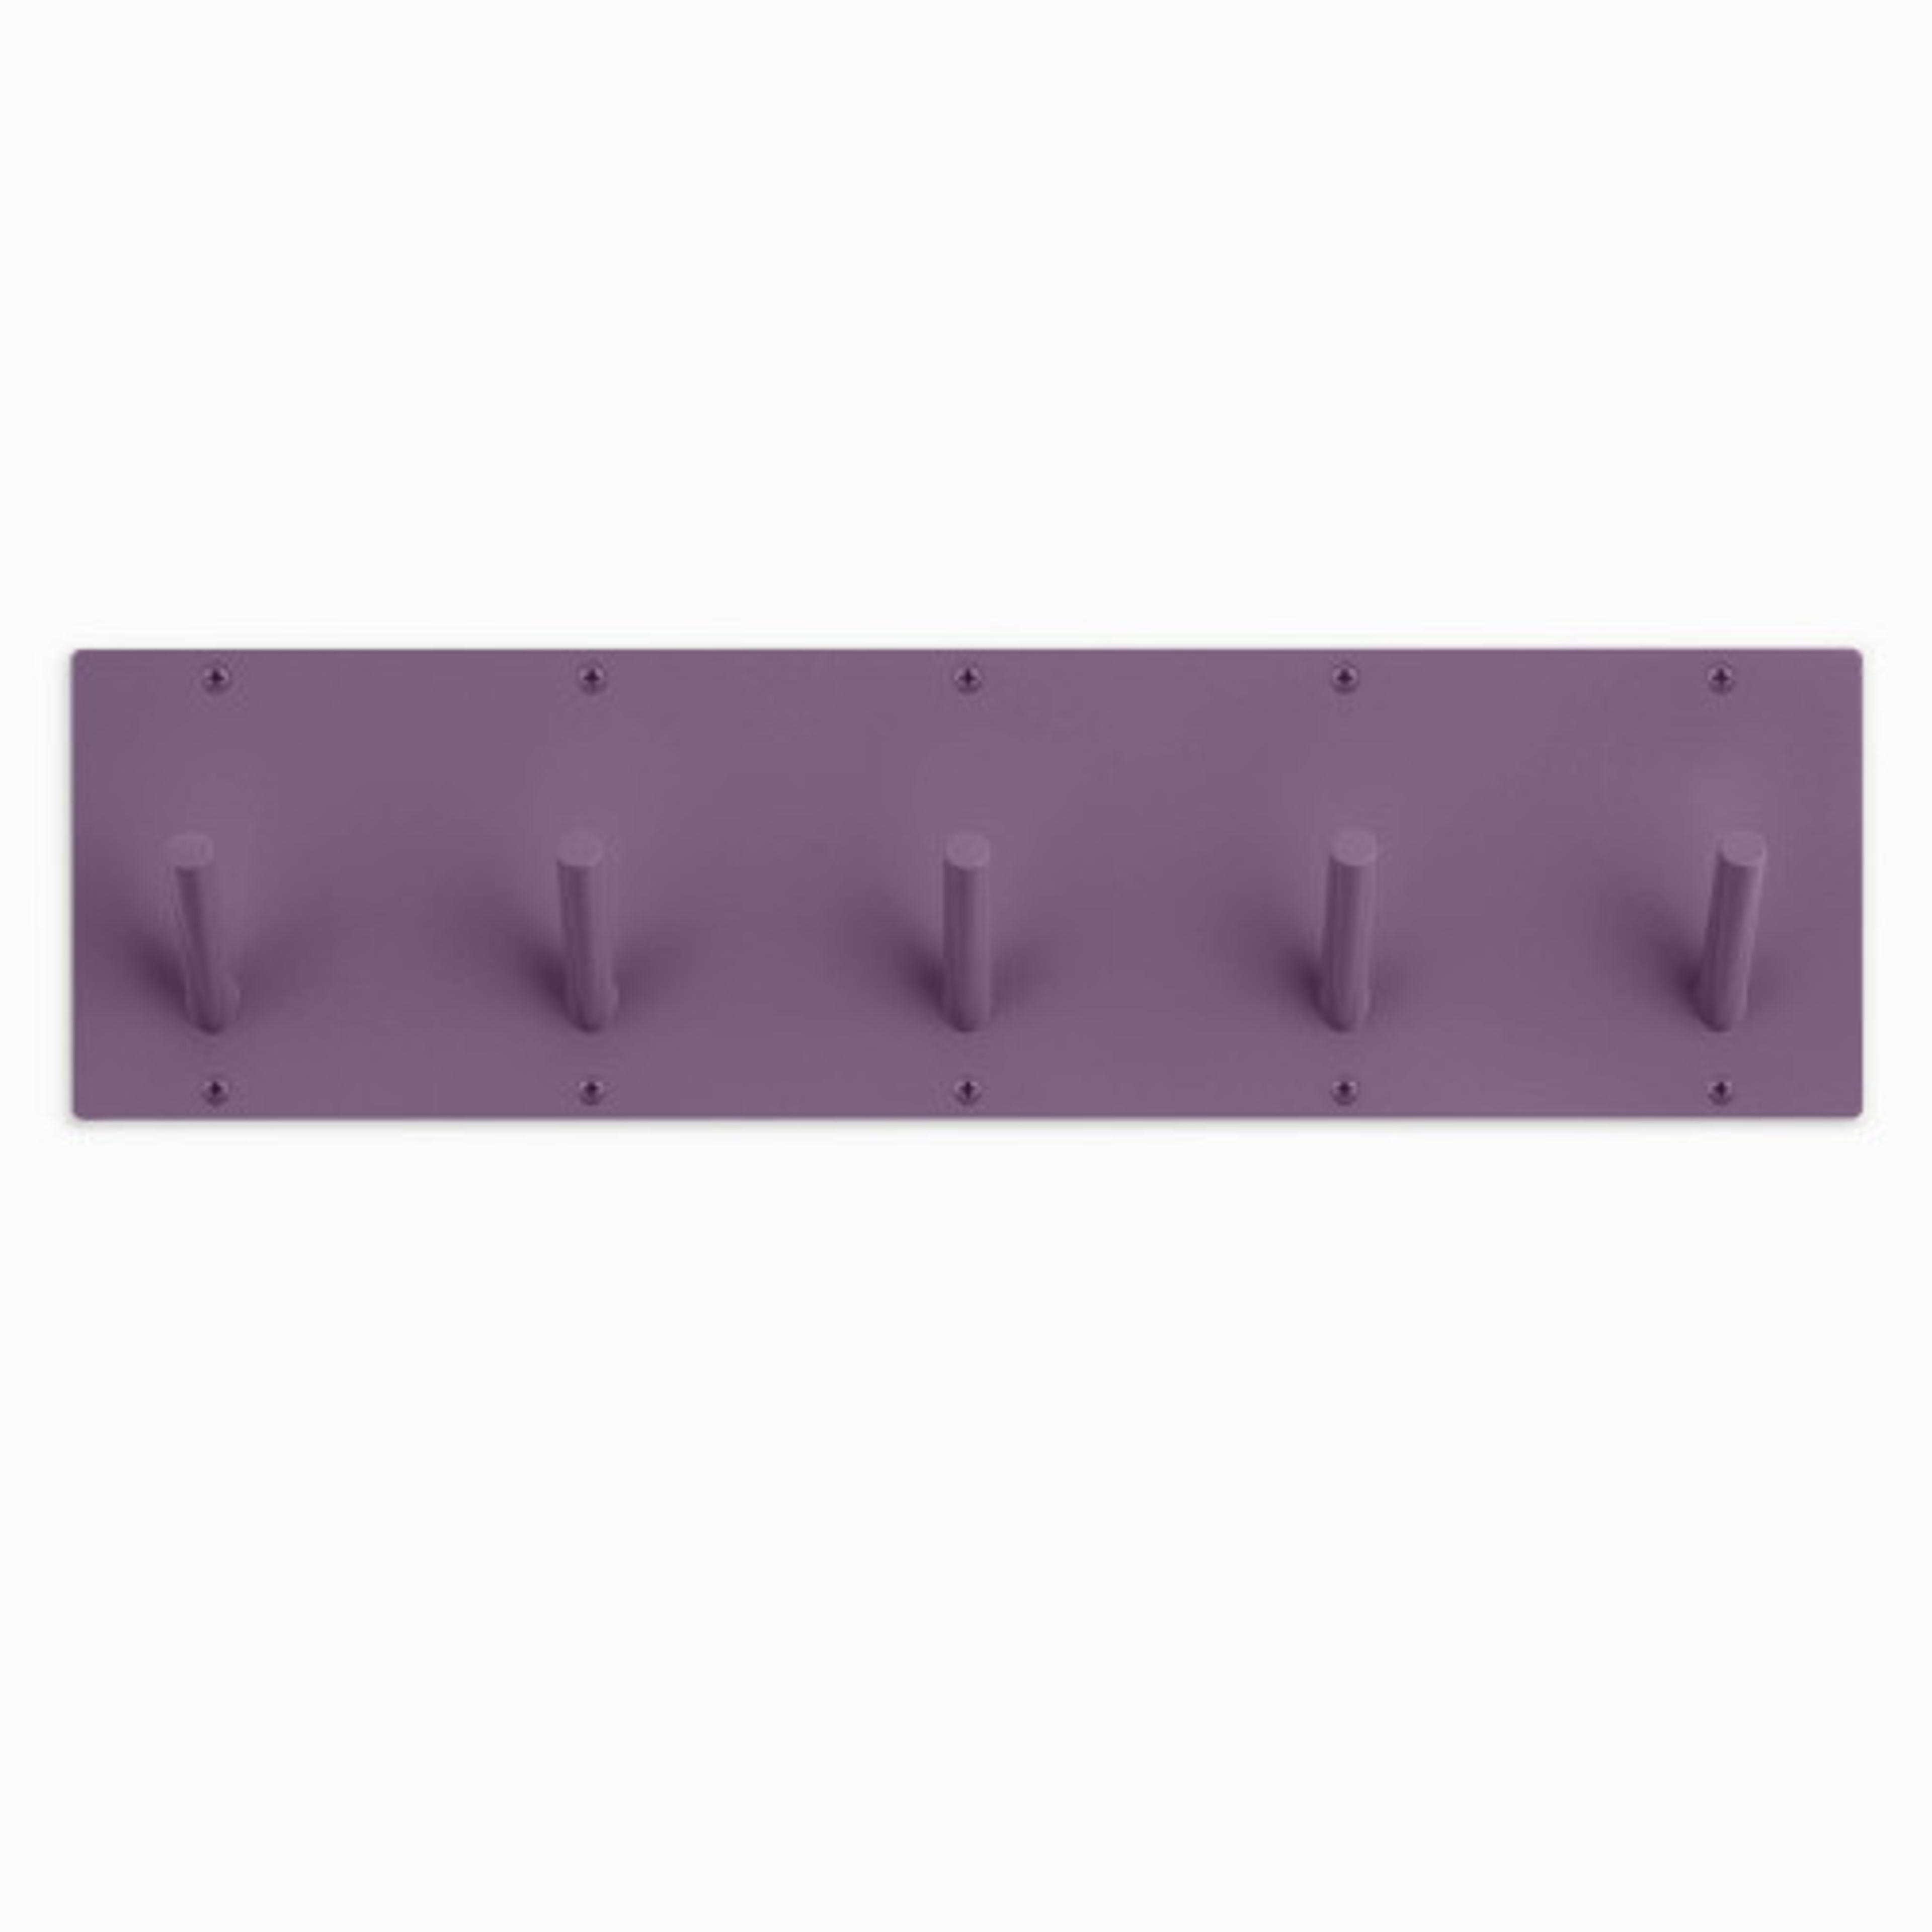 Peggy 5 Wall Hook: Available in ALL the Colors | Shelfology